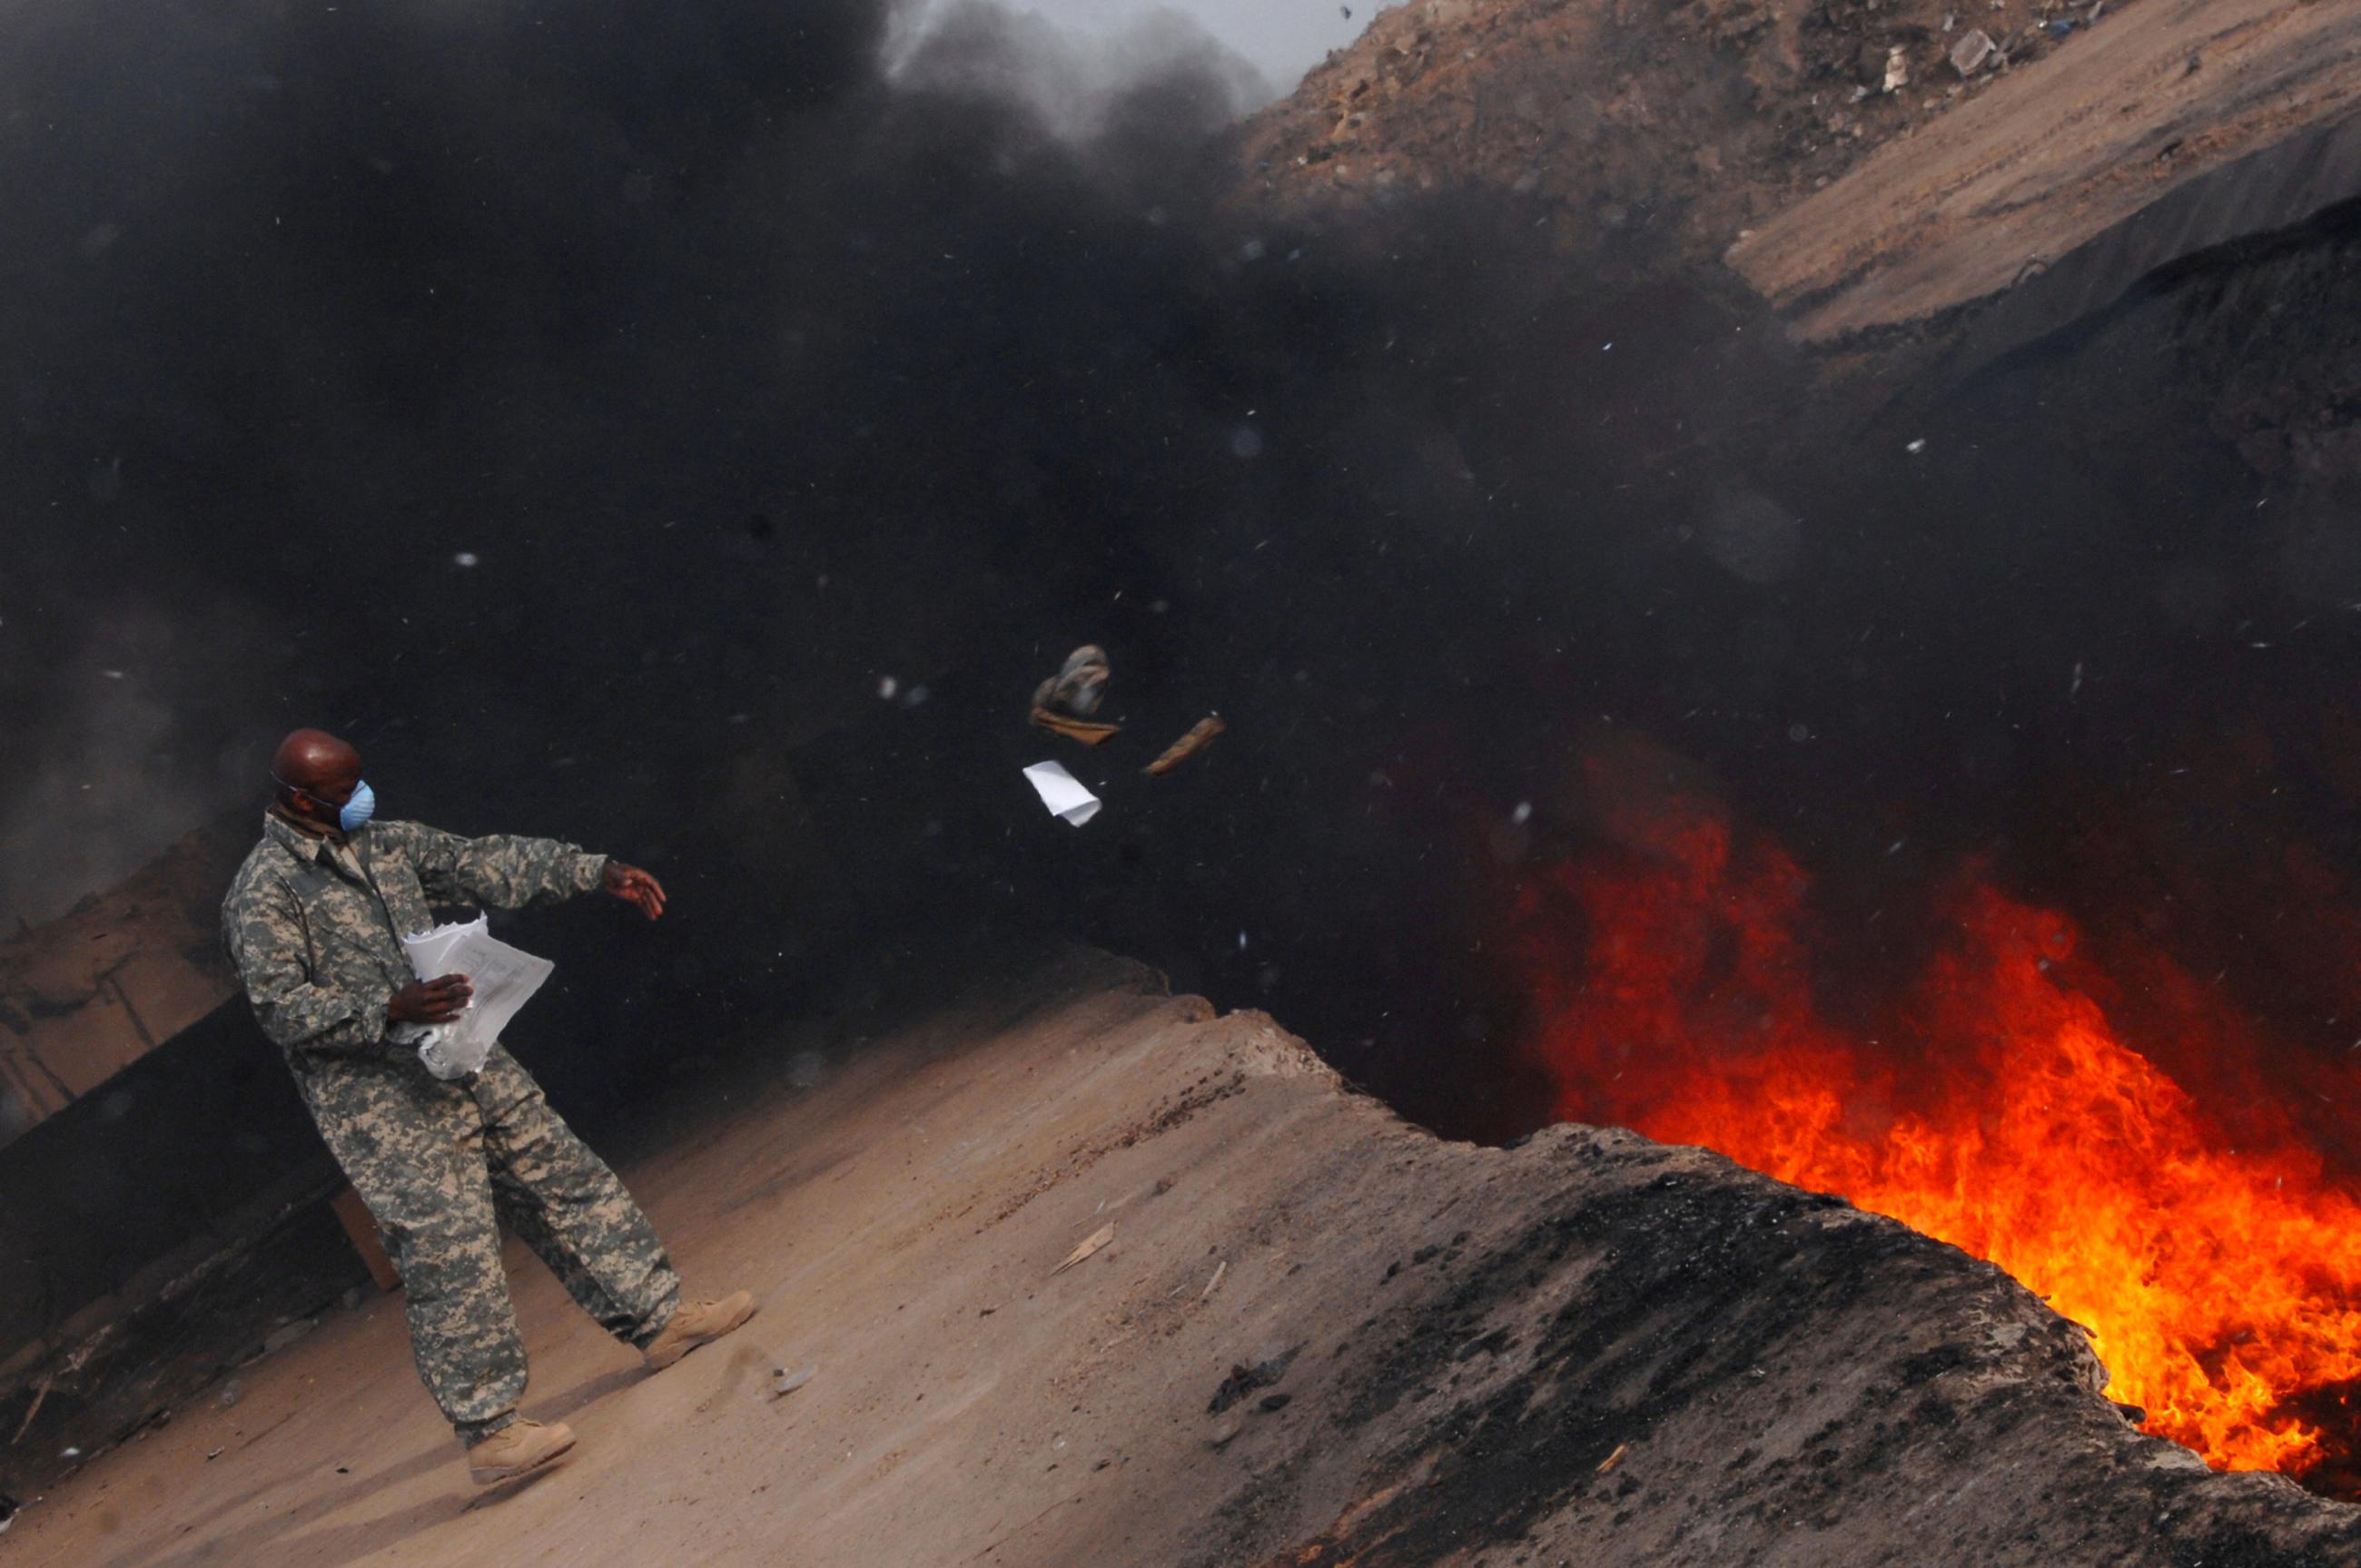 Master Sgt. Darryl Sterling, 332nd Expeditionary Logistics Readiness Squadron equipment manager, tosses unserviceable uniform items into a burn pit at Balad Air Base in Iraq, March 10, 2008.